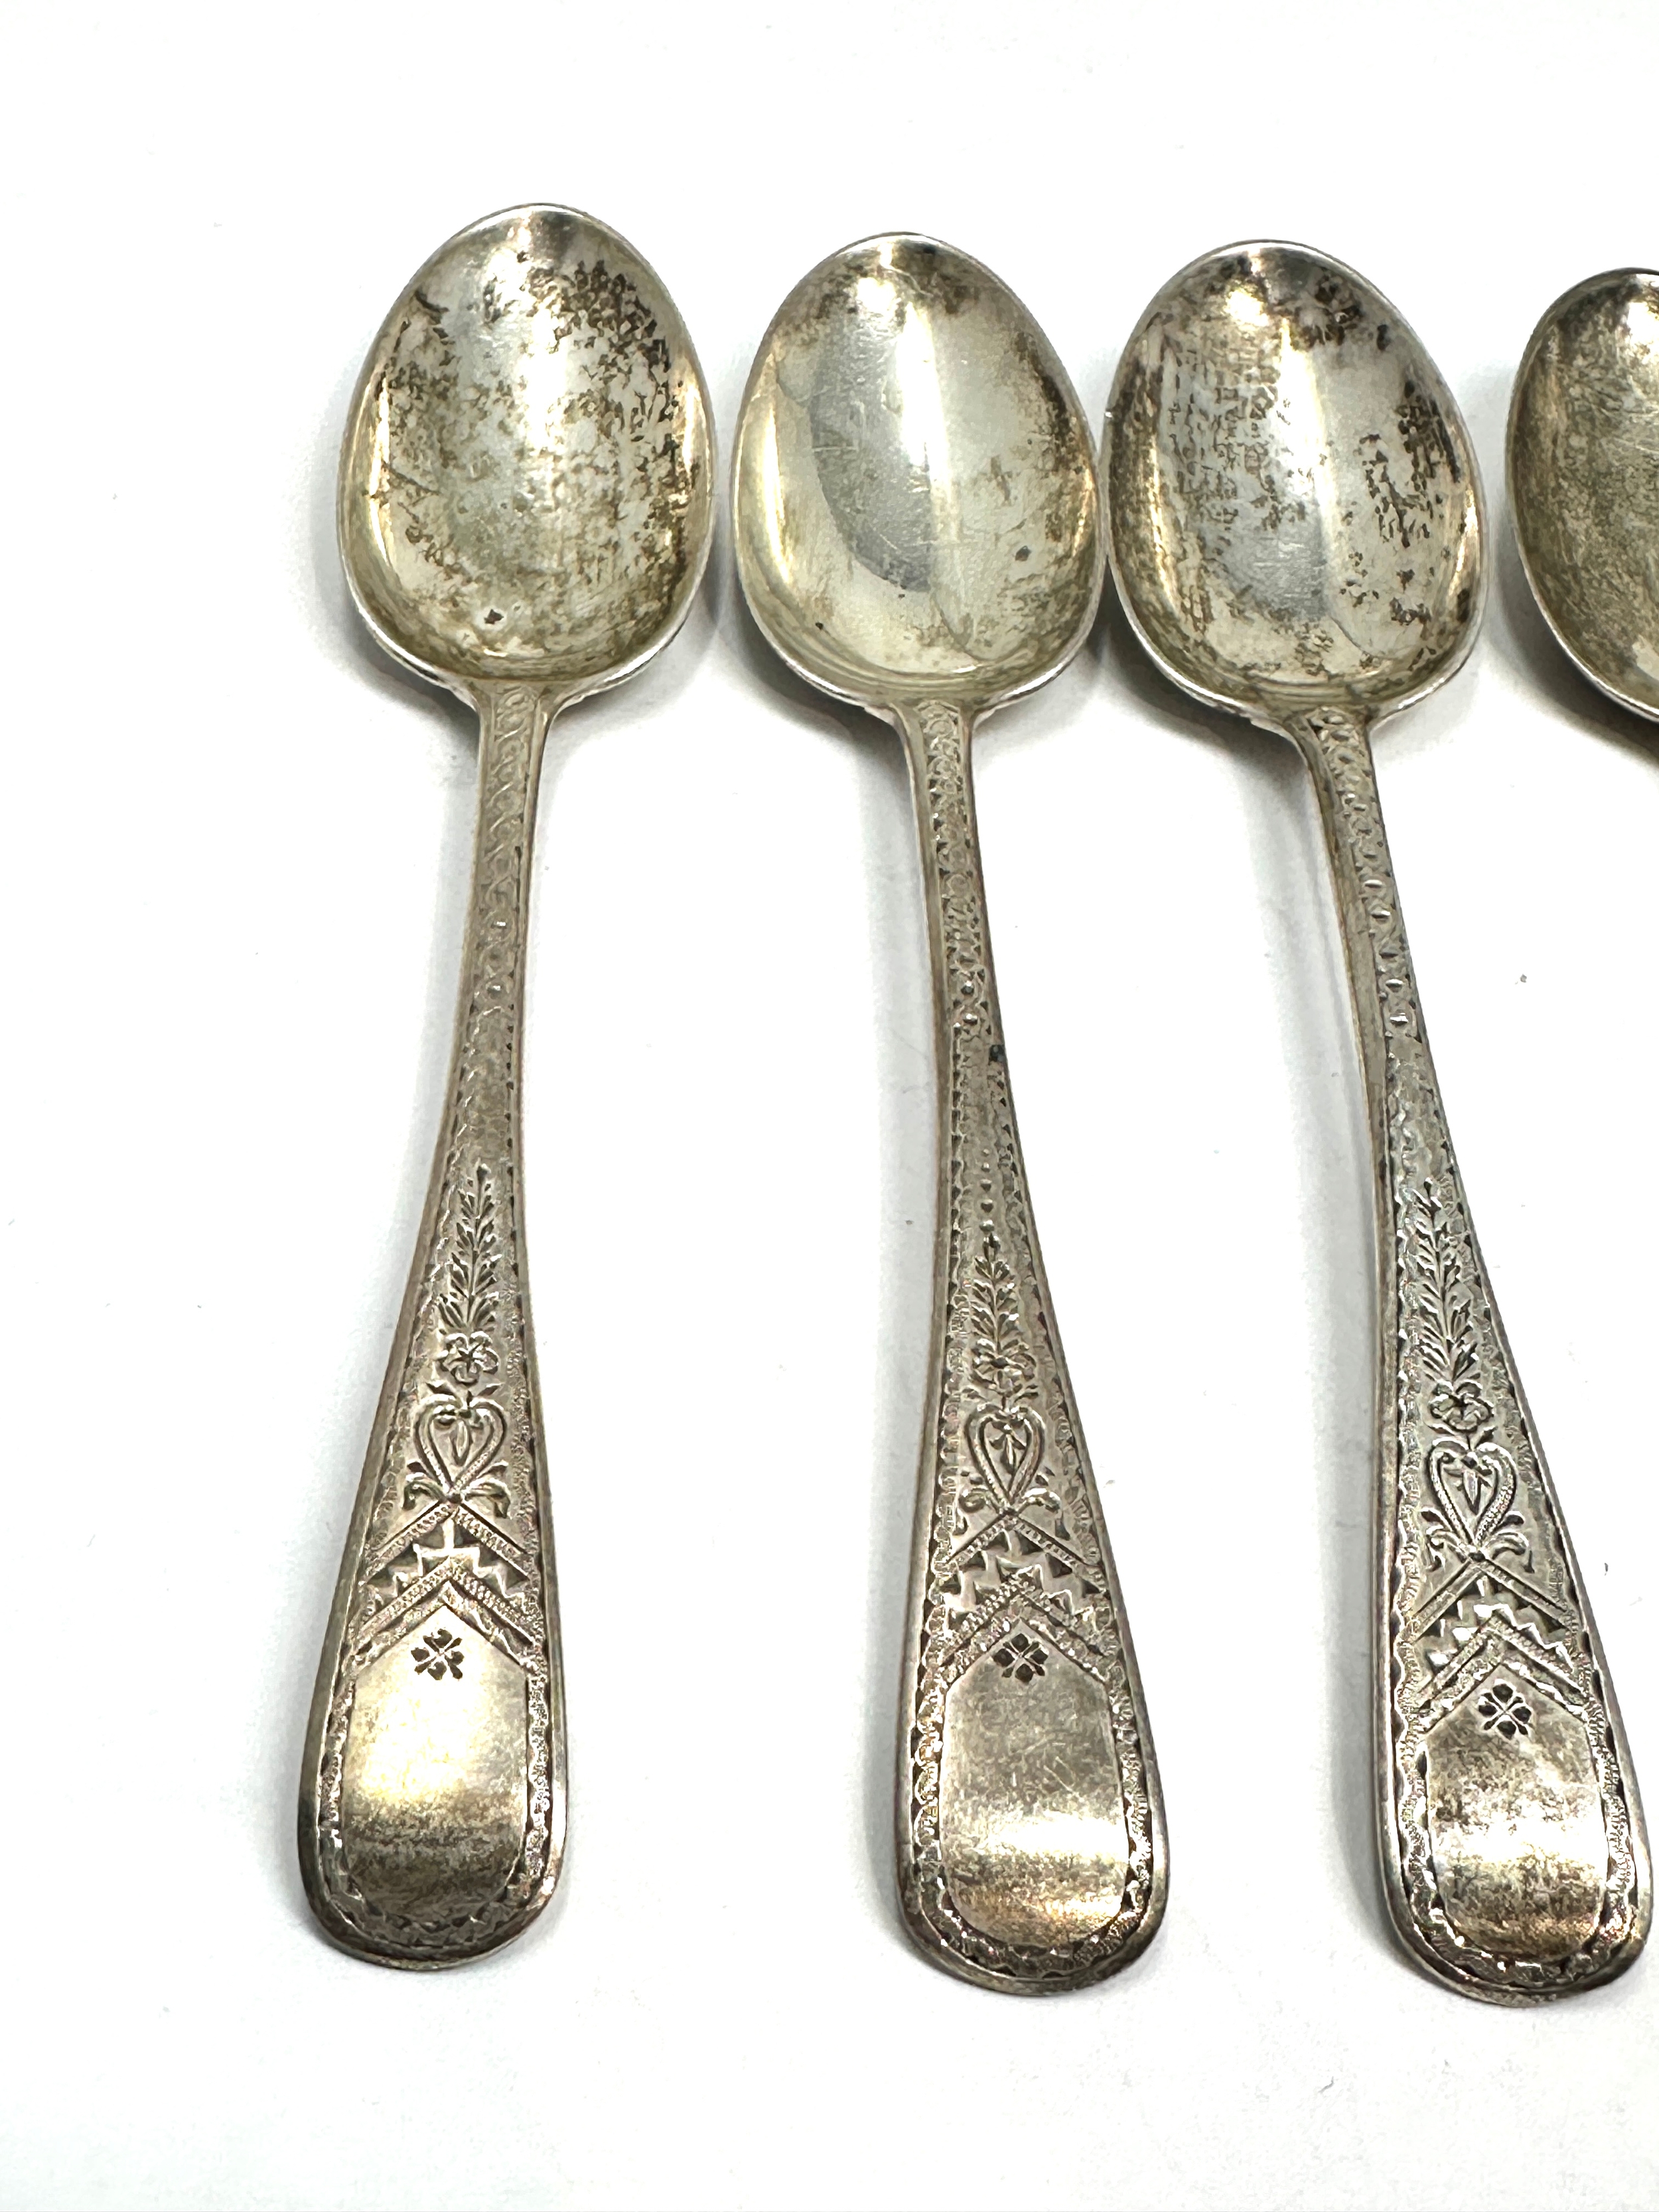 6 Antique bright cut silver tea spoons london silver hallmarks weight 110g - Image 2 of 4